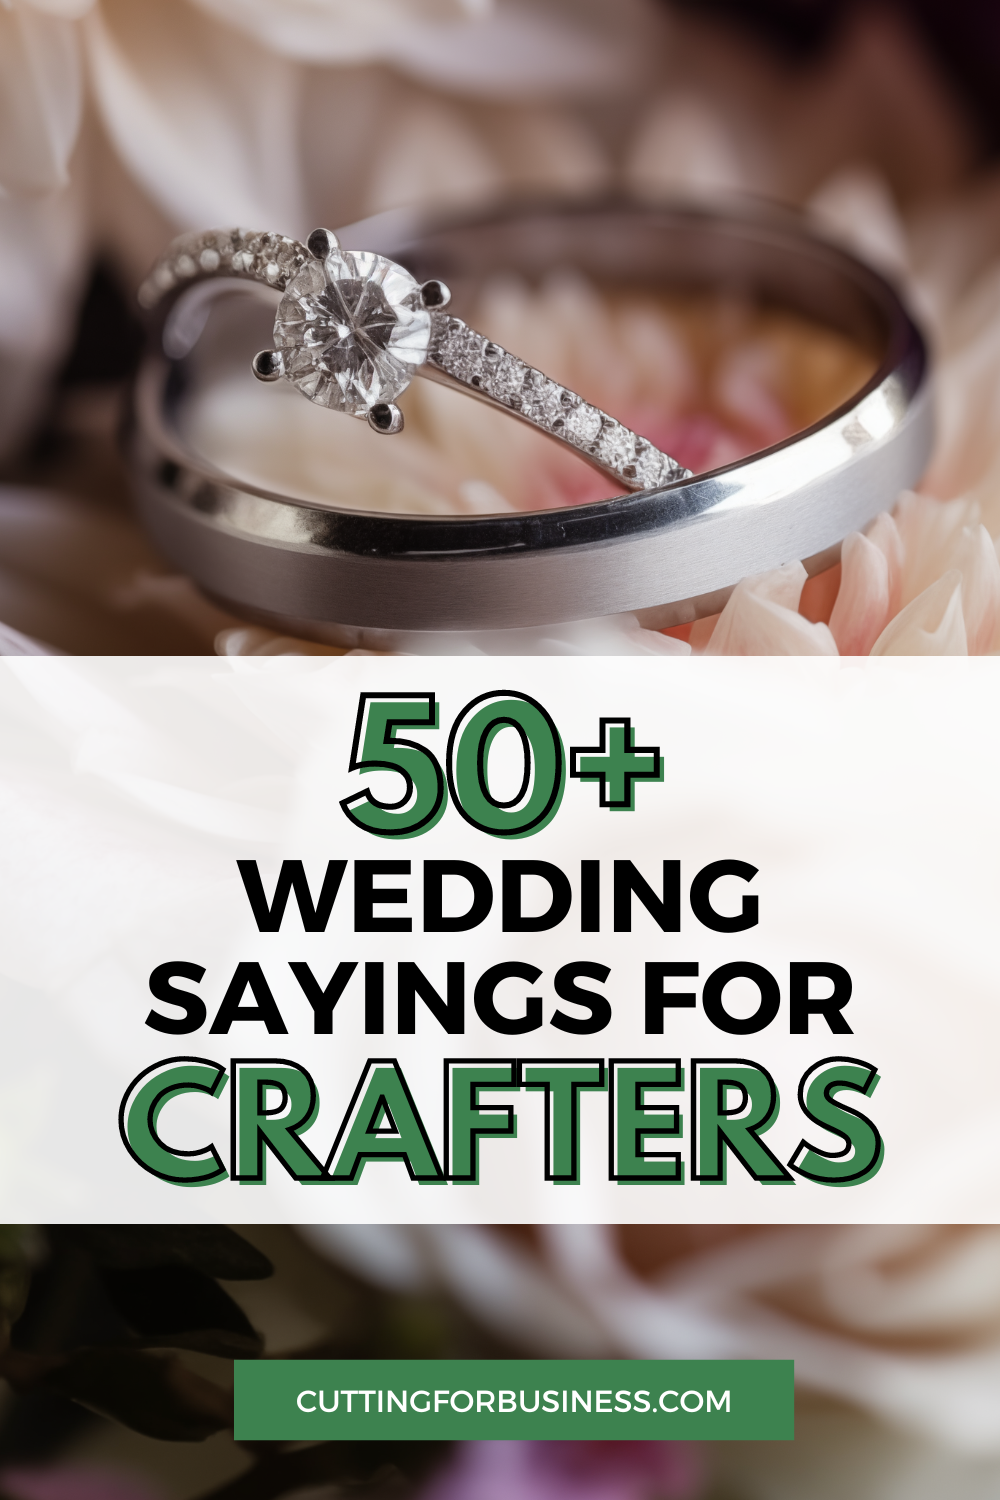 50+ Wedding Sayings for Crafters - cuttingforbusiness.com